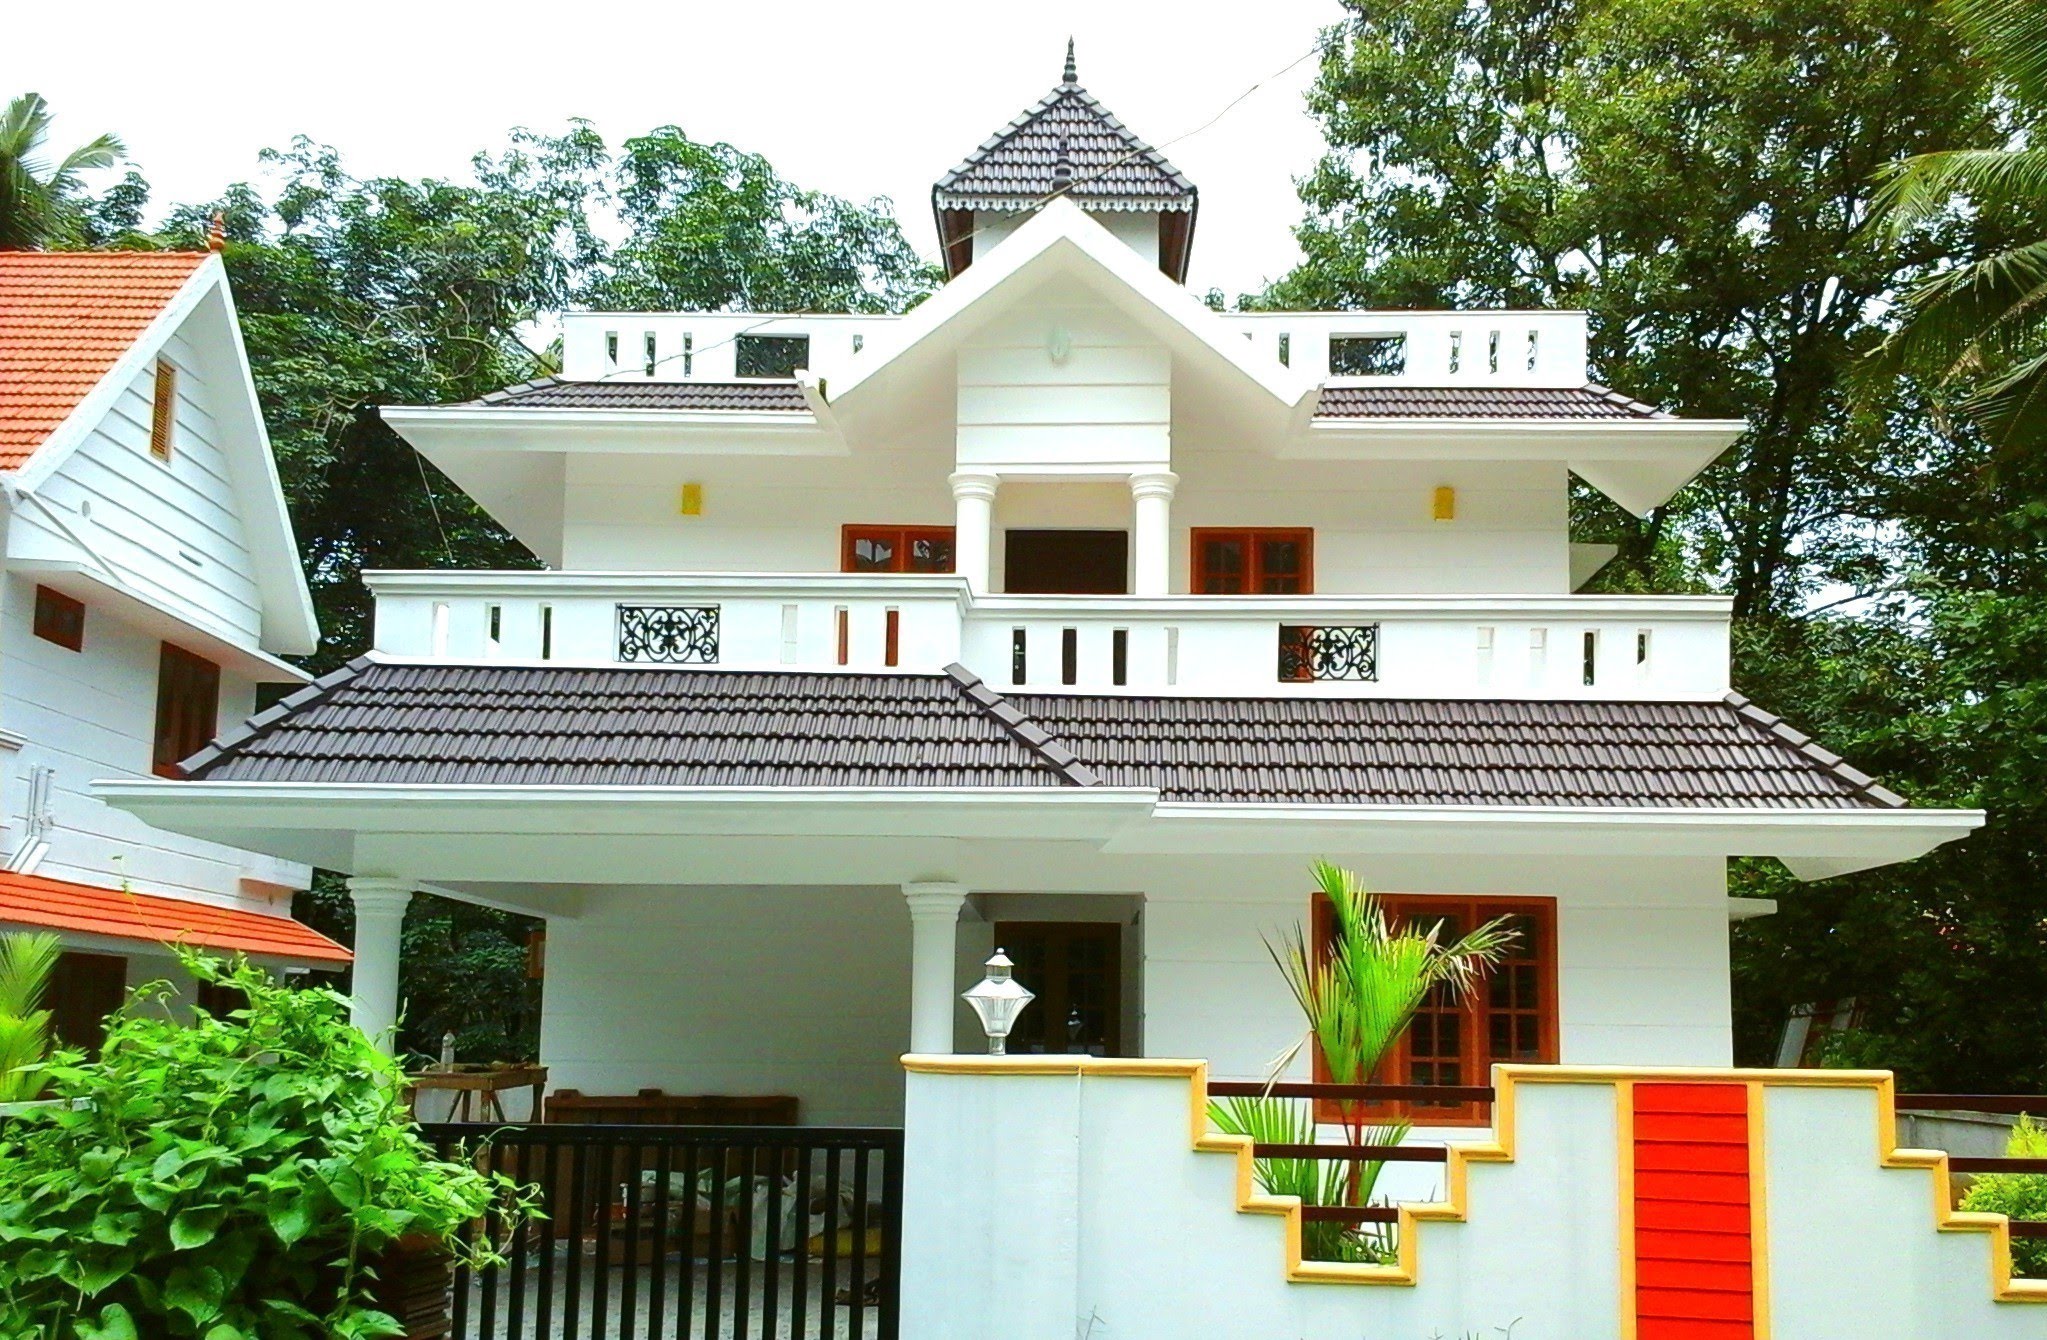 Sloped Roofs in a Kerala Style House Design